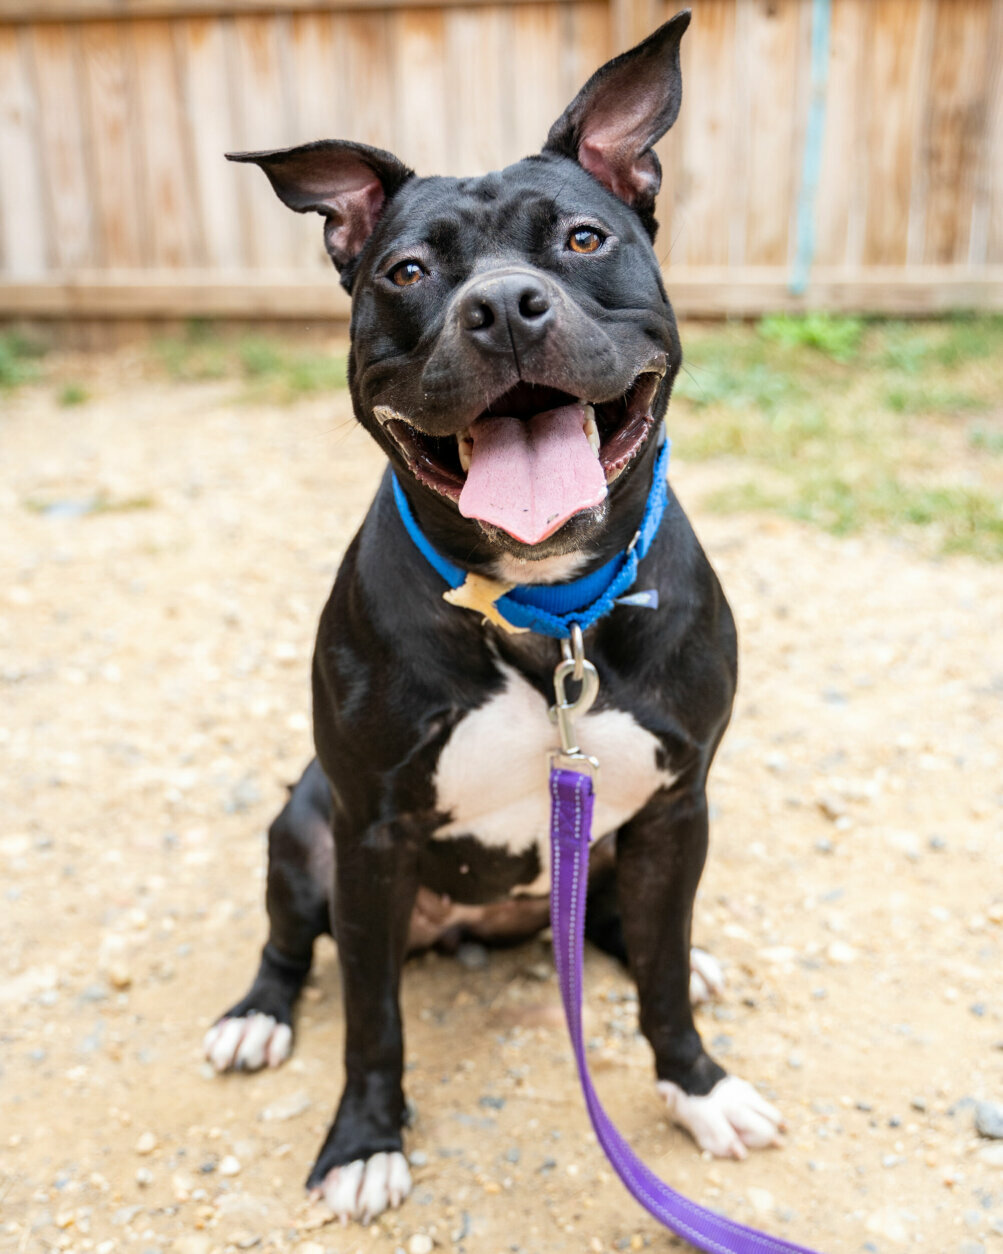 <p><strong>Sheena</strong> is still available for adoption!</p>
<p>At just 2 years old, Sheena is the life of the party. She has been working hard with HRA’s behavior team on her manners, and has been having a blast with training.</p>
